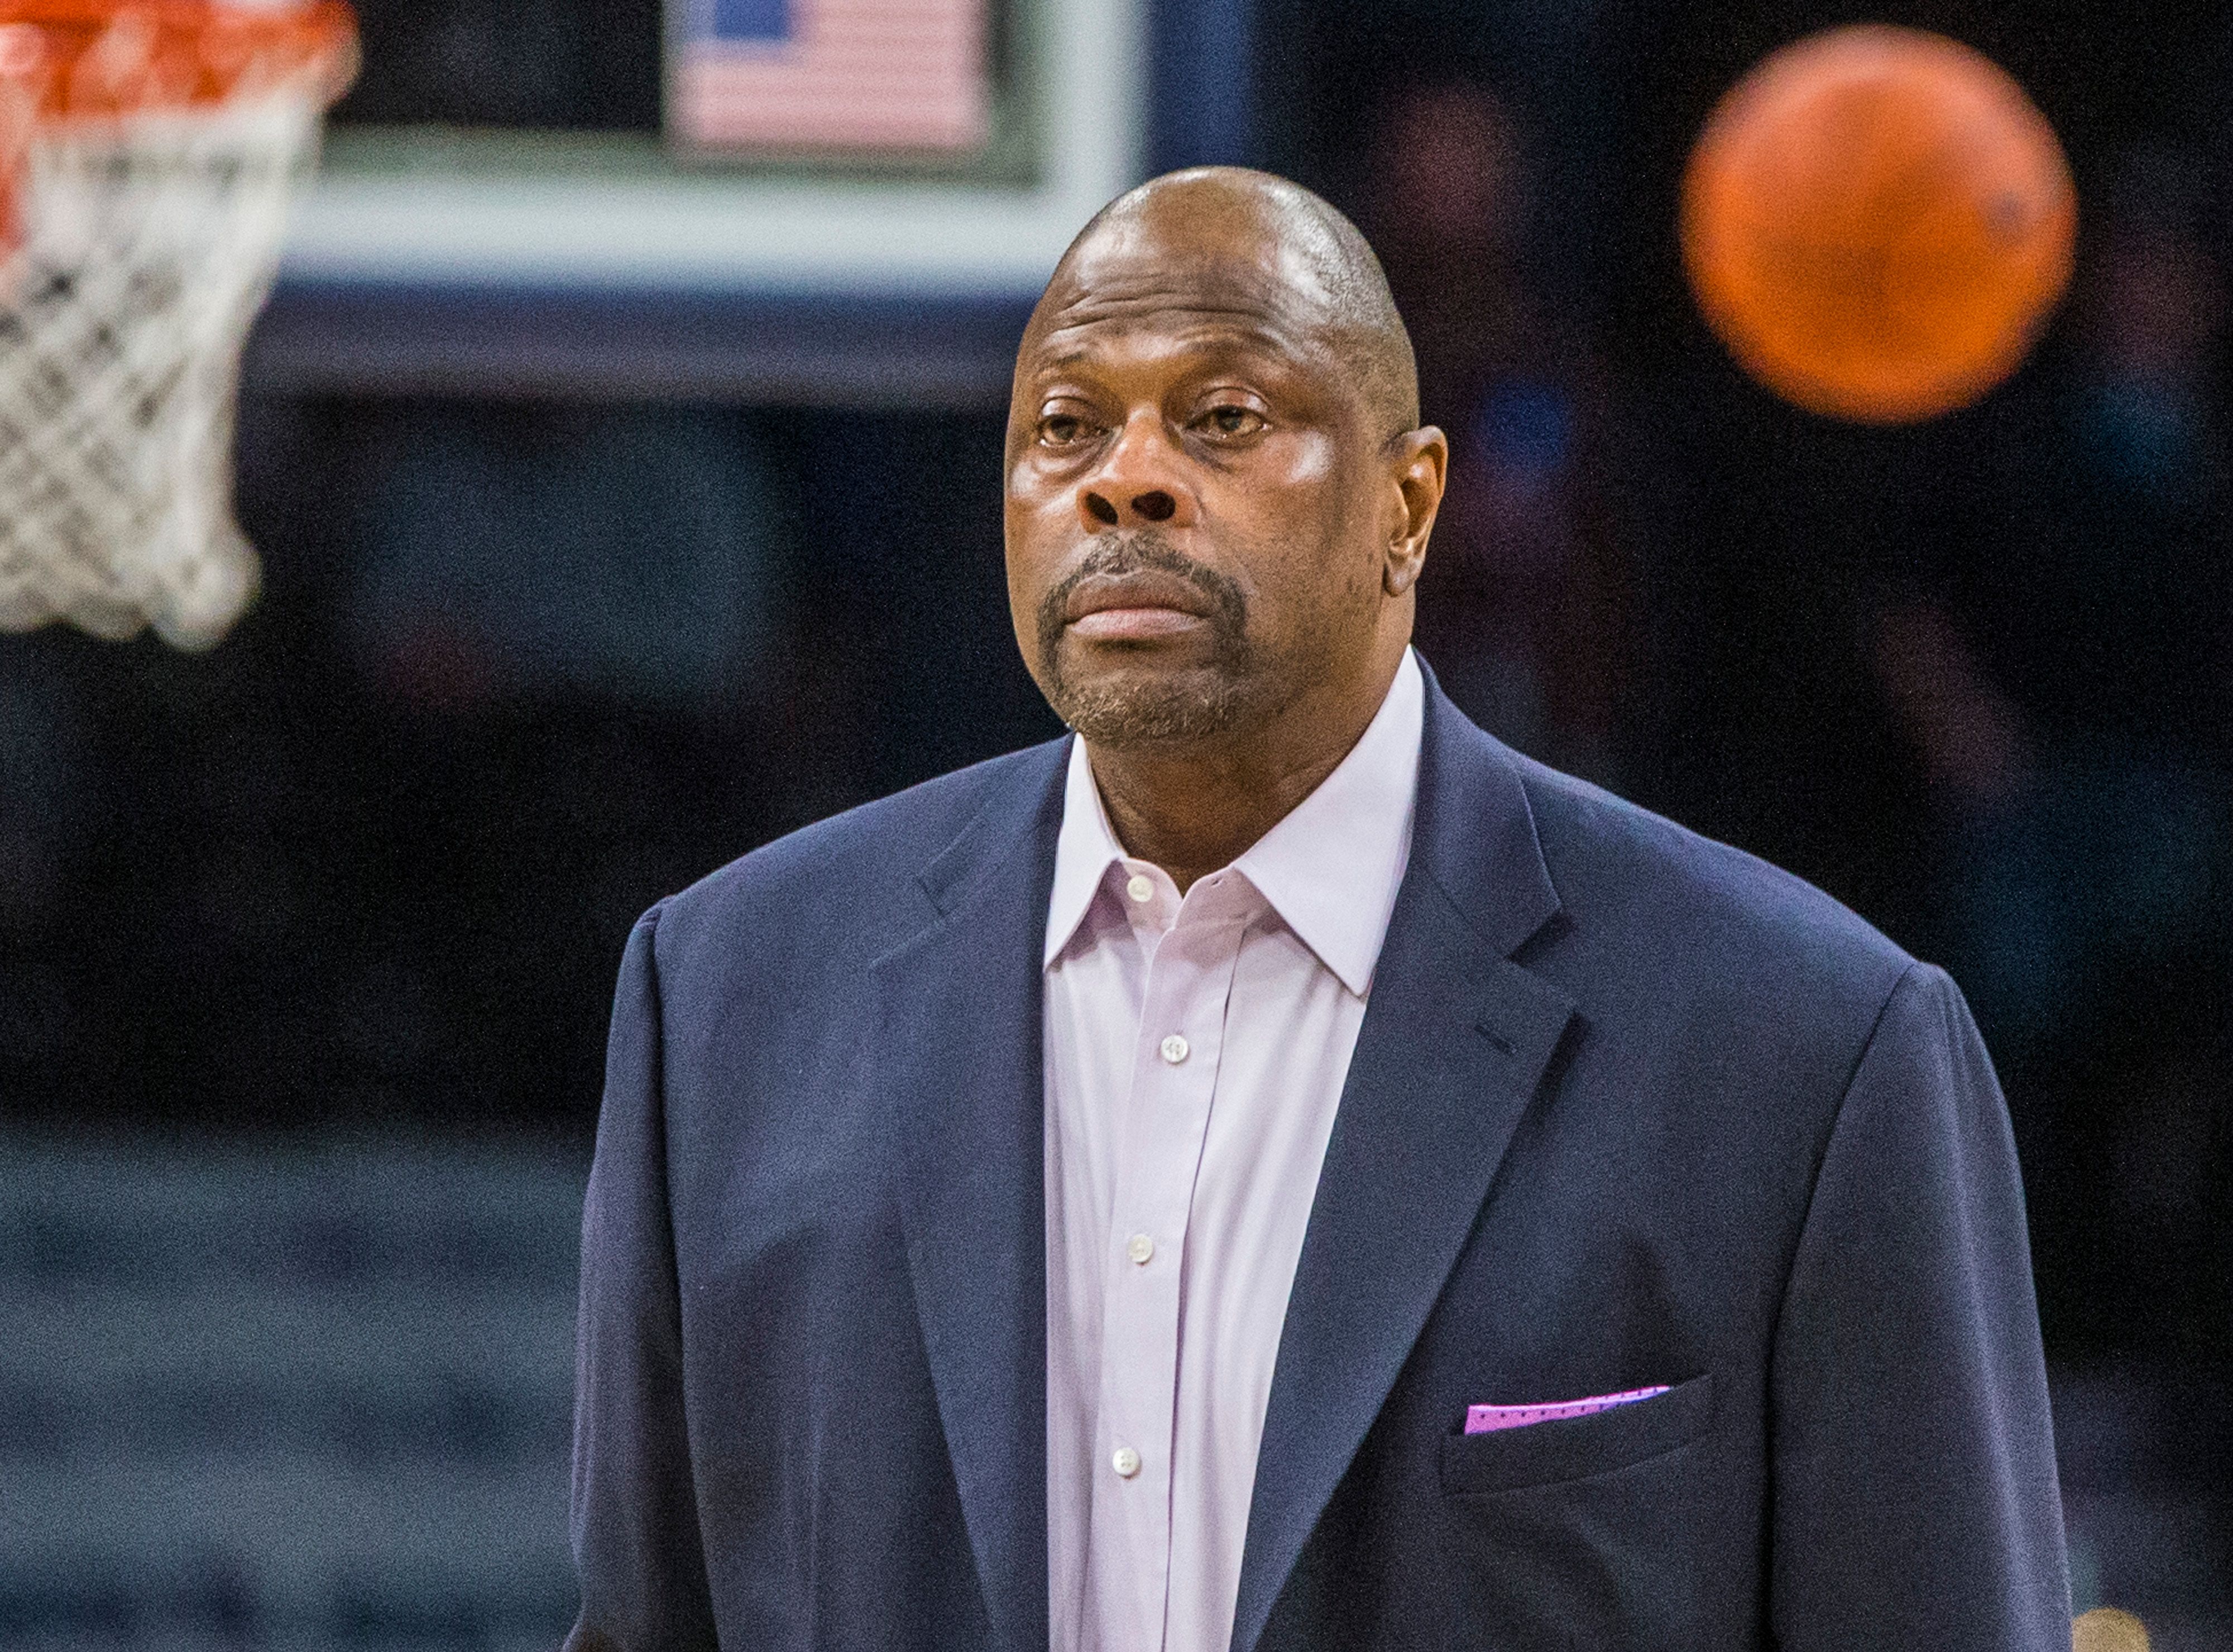 Head Coach Patrick Ewing from Georgetown University during a game between Butler and Georgetown at Capital One Arena in Washington, DC. | Photo: Getty Images